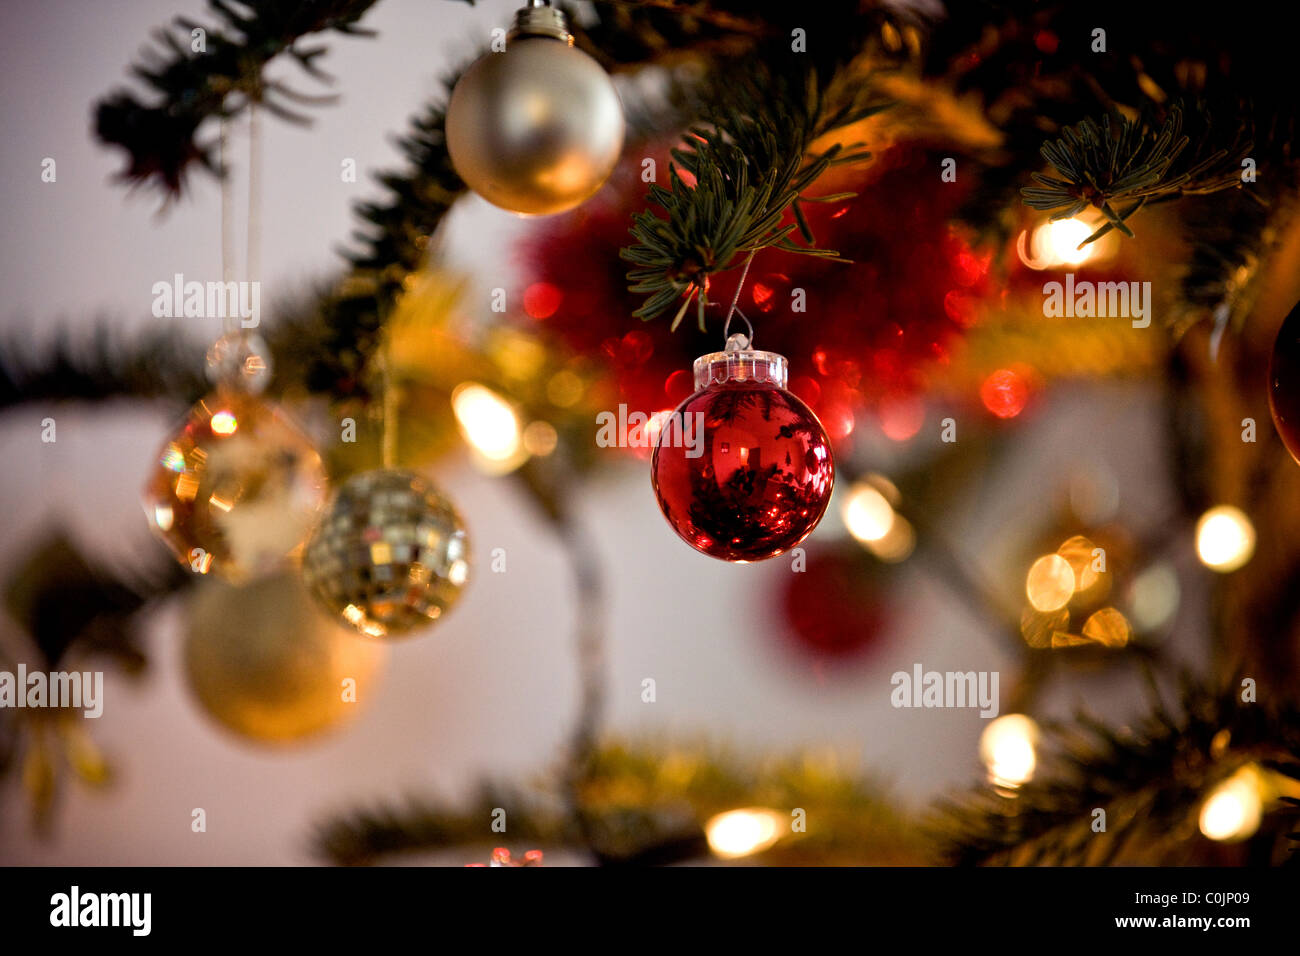 Red and gold baubles hanging on a Christmas tree Stock Photo